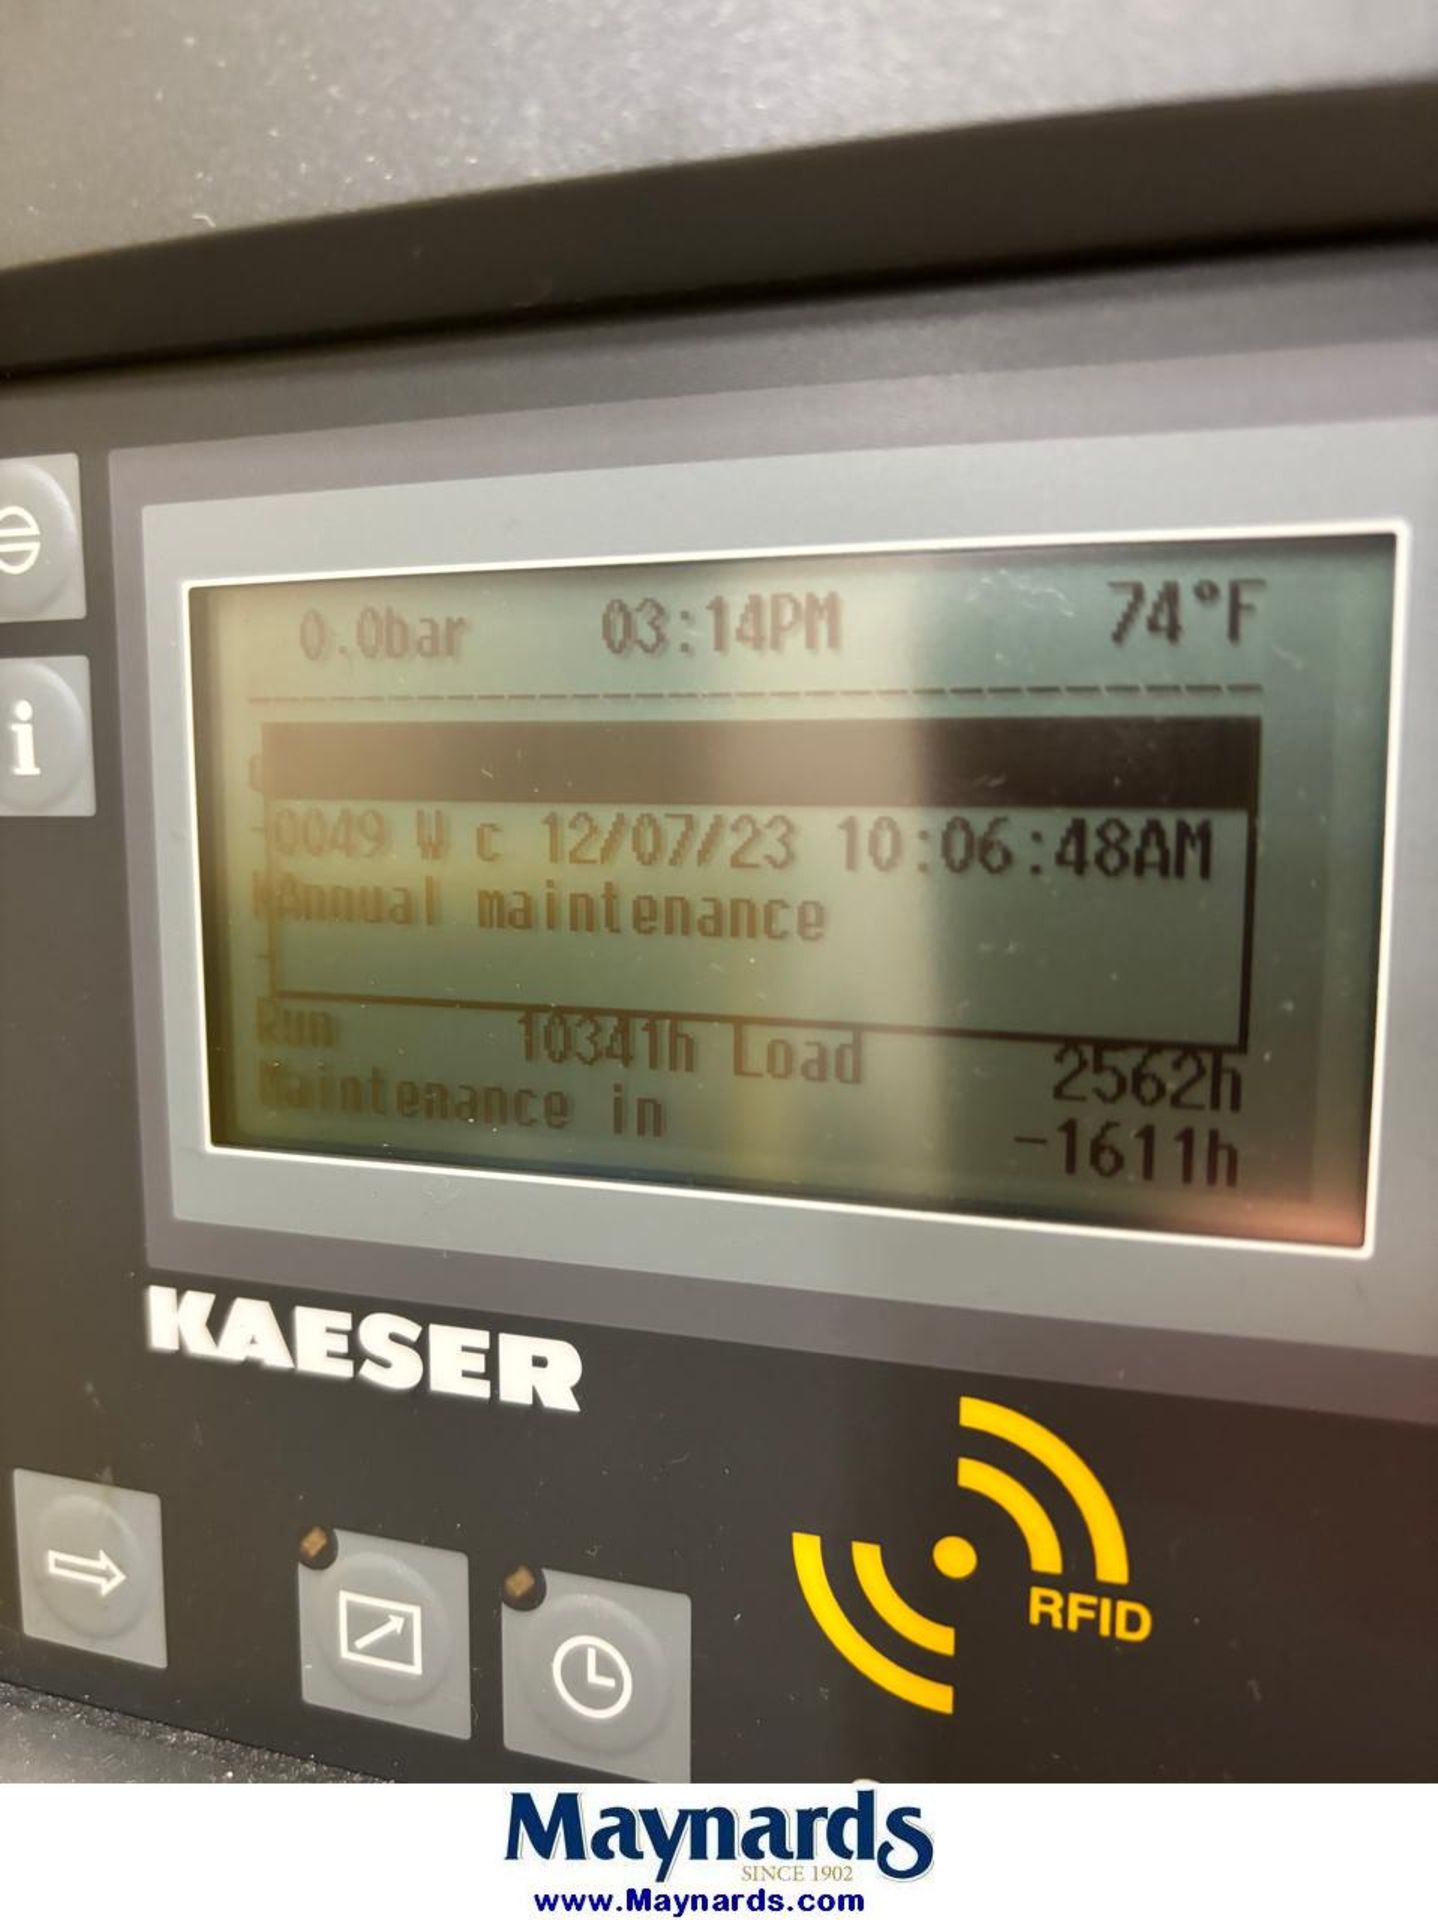 2020 Kaeser Sigma ASD 40 ST rotary screw air compressor 40 HP 125 PSIG , 1034 load hrs, 2562 run hrs - Image 2 of 5